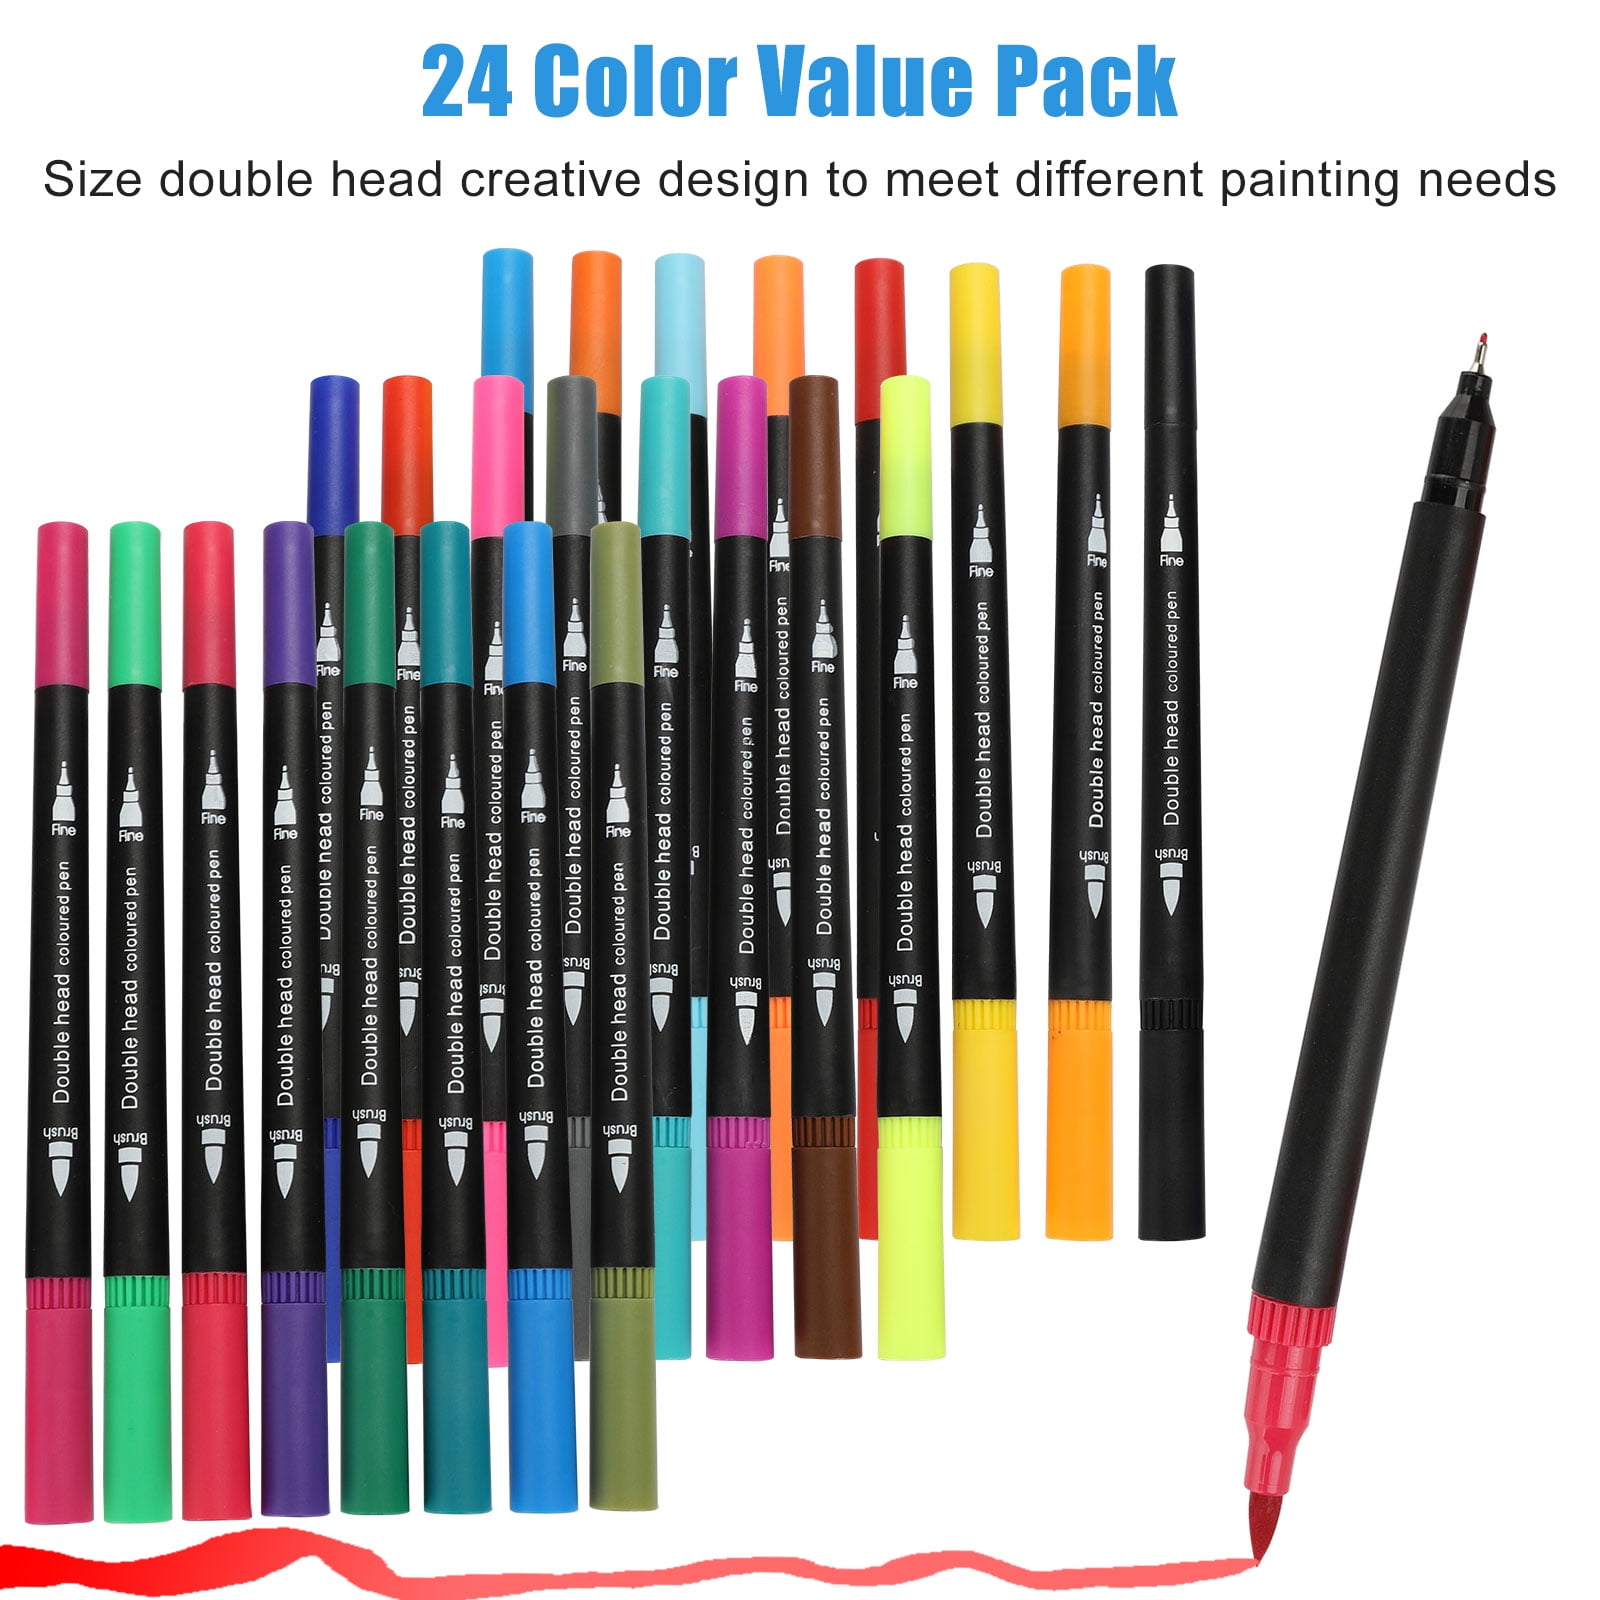  Coloring Markers for Adult Coloring Books Fine Tip 24 Dual  Brush Pens Colored Thin Marker Set for Adults Kids Teens School Office Art  Writing Sketch Drawing Water Based Double Sided Color